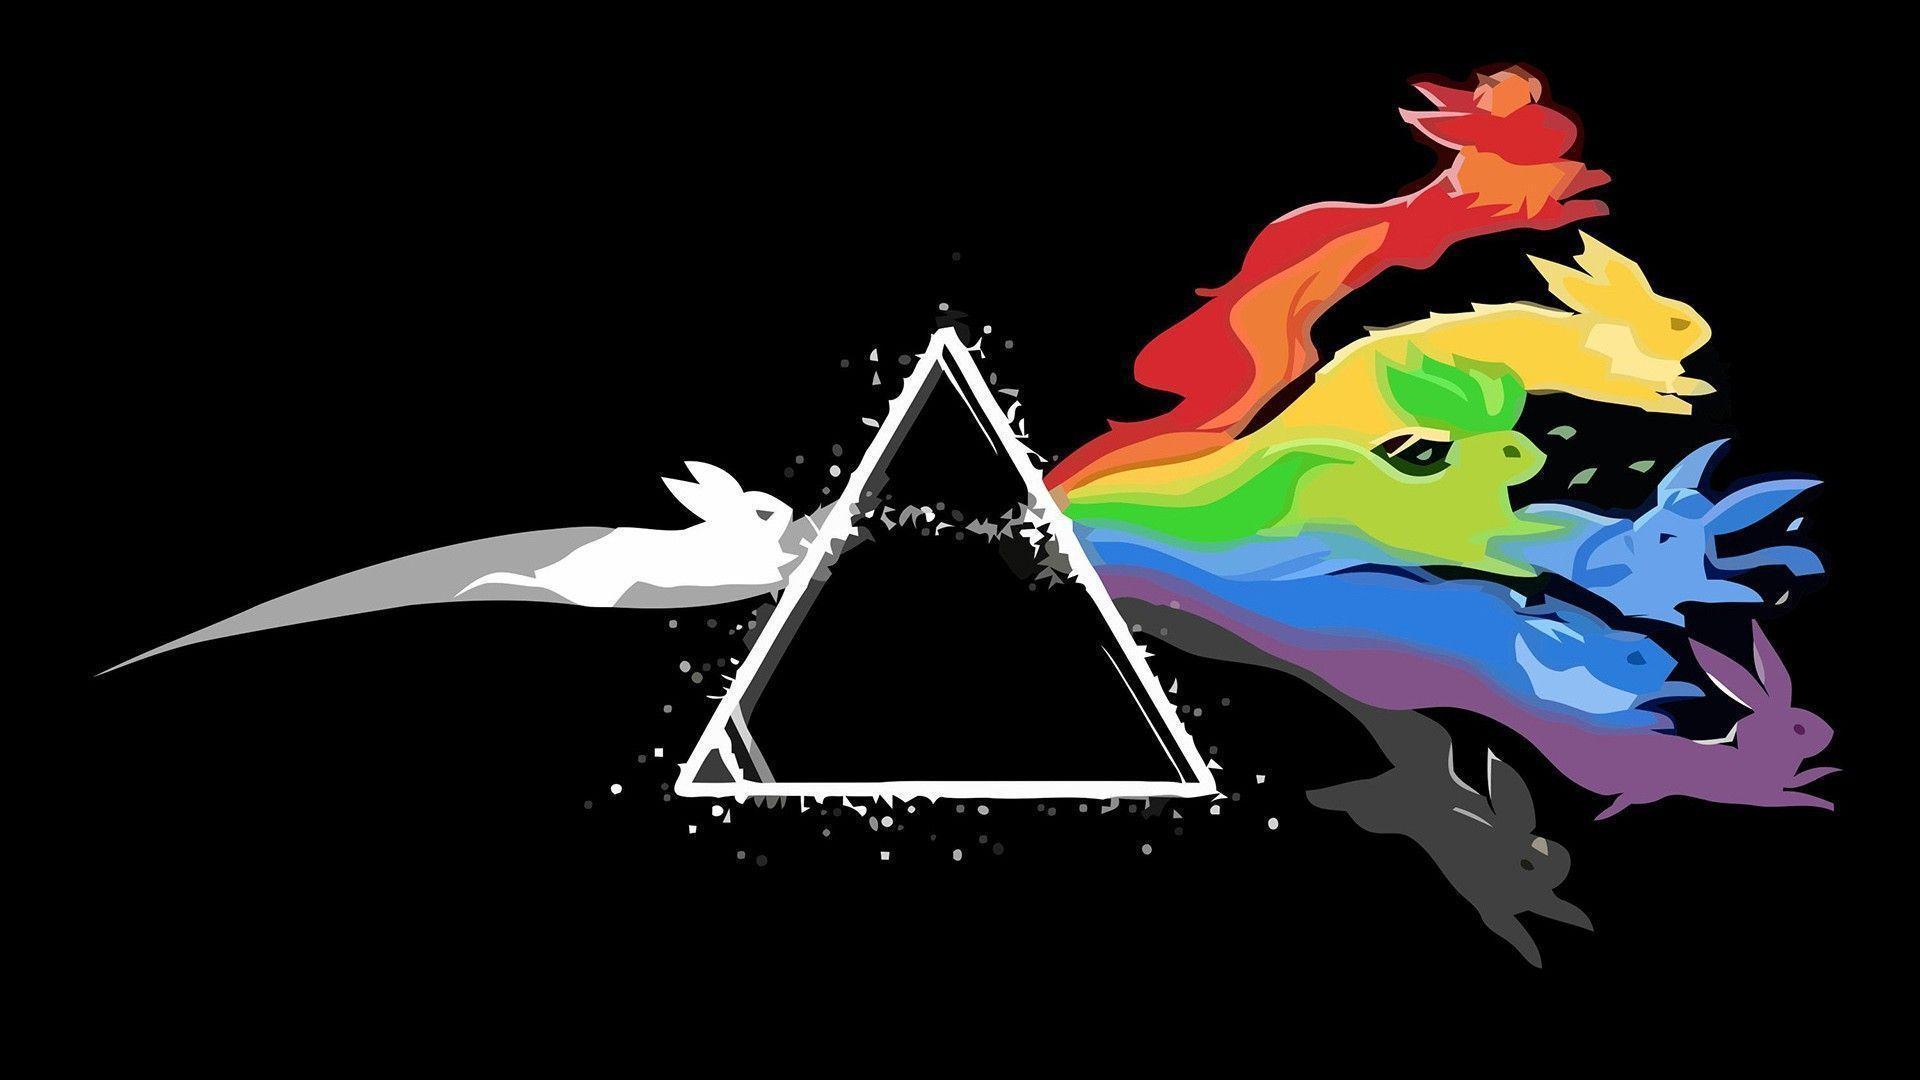 image and Pink Floyd Pokemon Dispersion Wallpaper 1920x1080PX